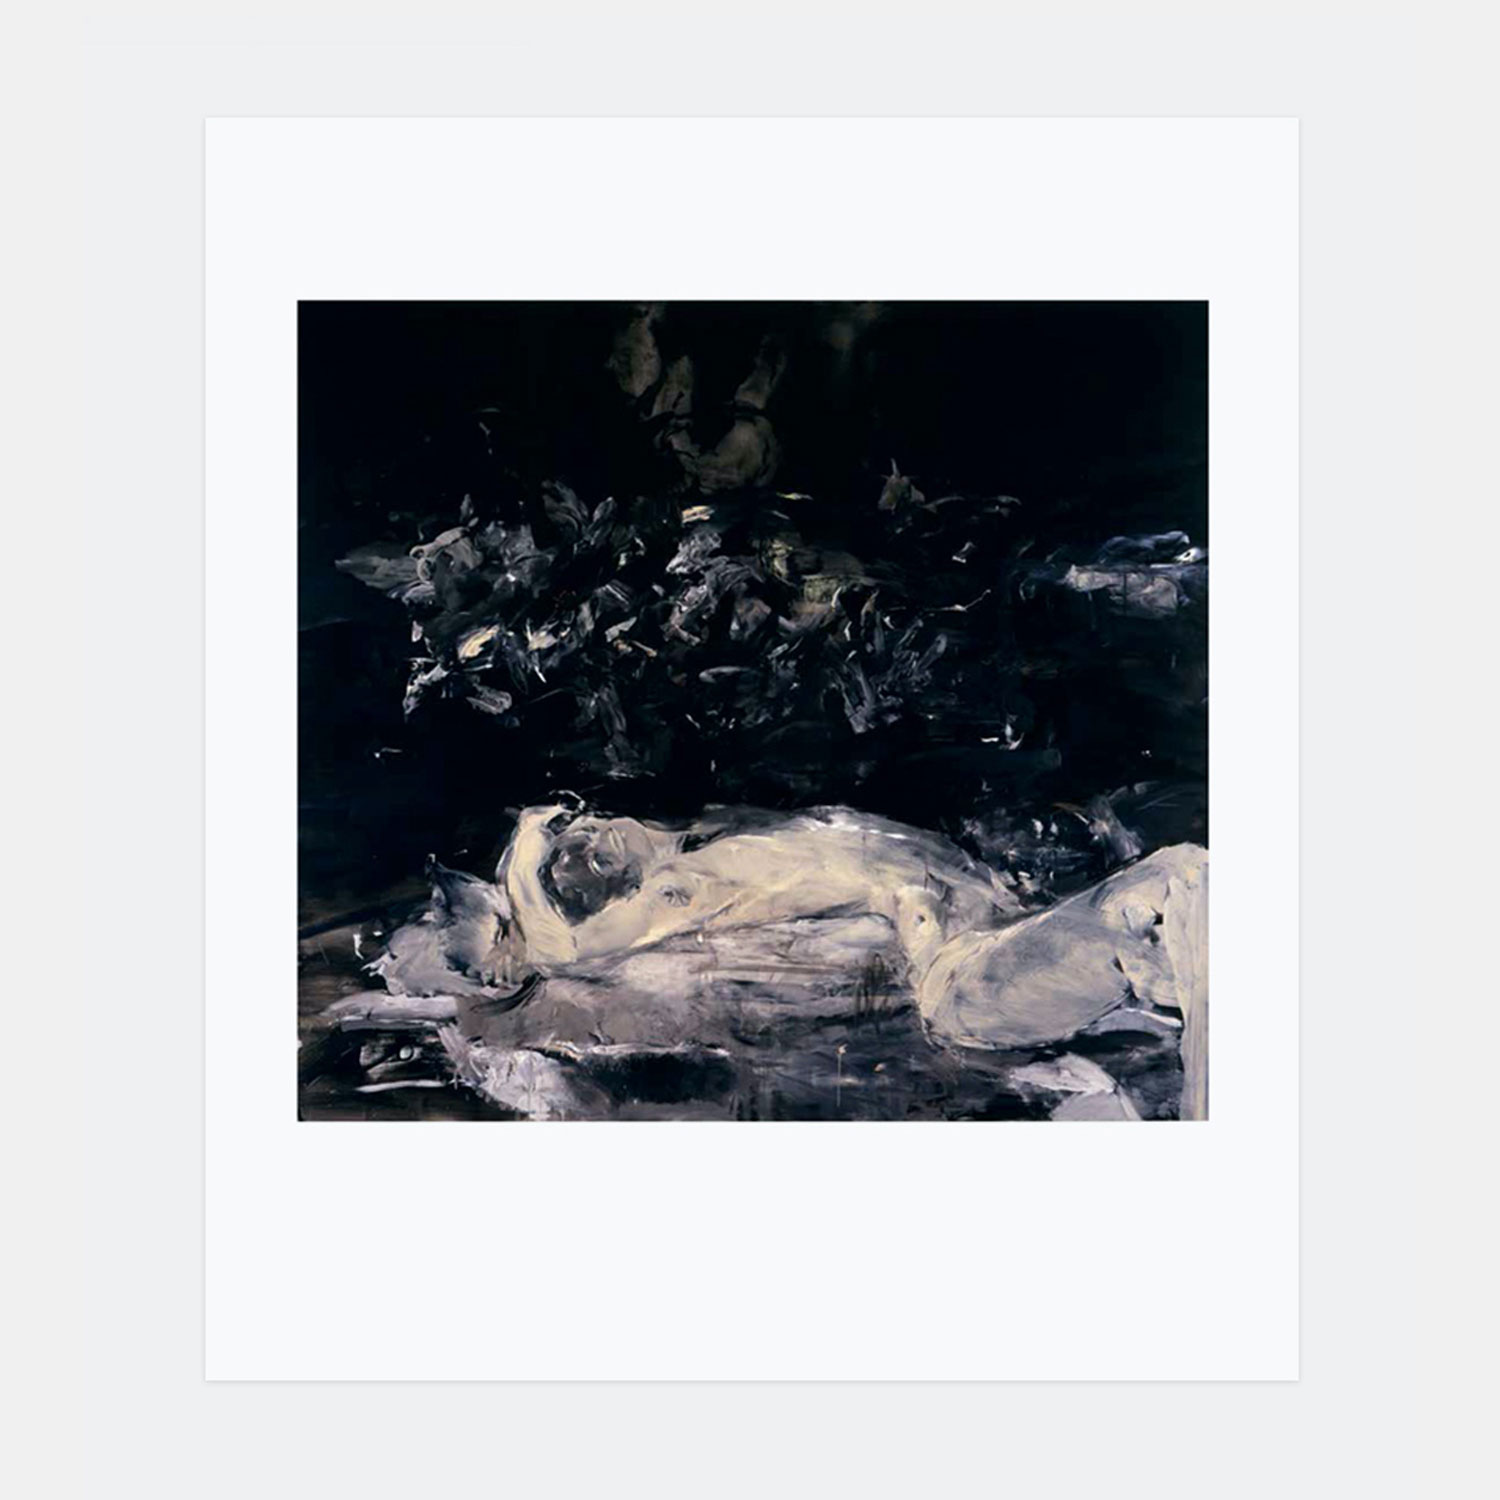 Black Painting 1 (2020) by Cecily Brown 4-color digital print on 330gsm Epson Hot Press natural paper, 9.5 x 11 inches. Edition of 50 + 6 APs, Signed and numbered on reverse, bottom-centre